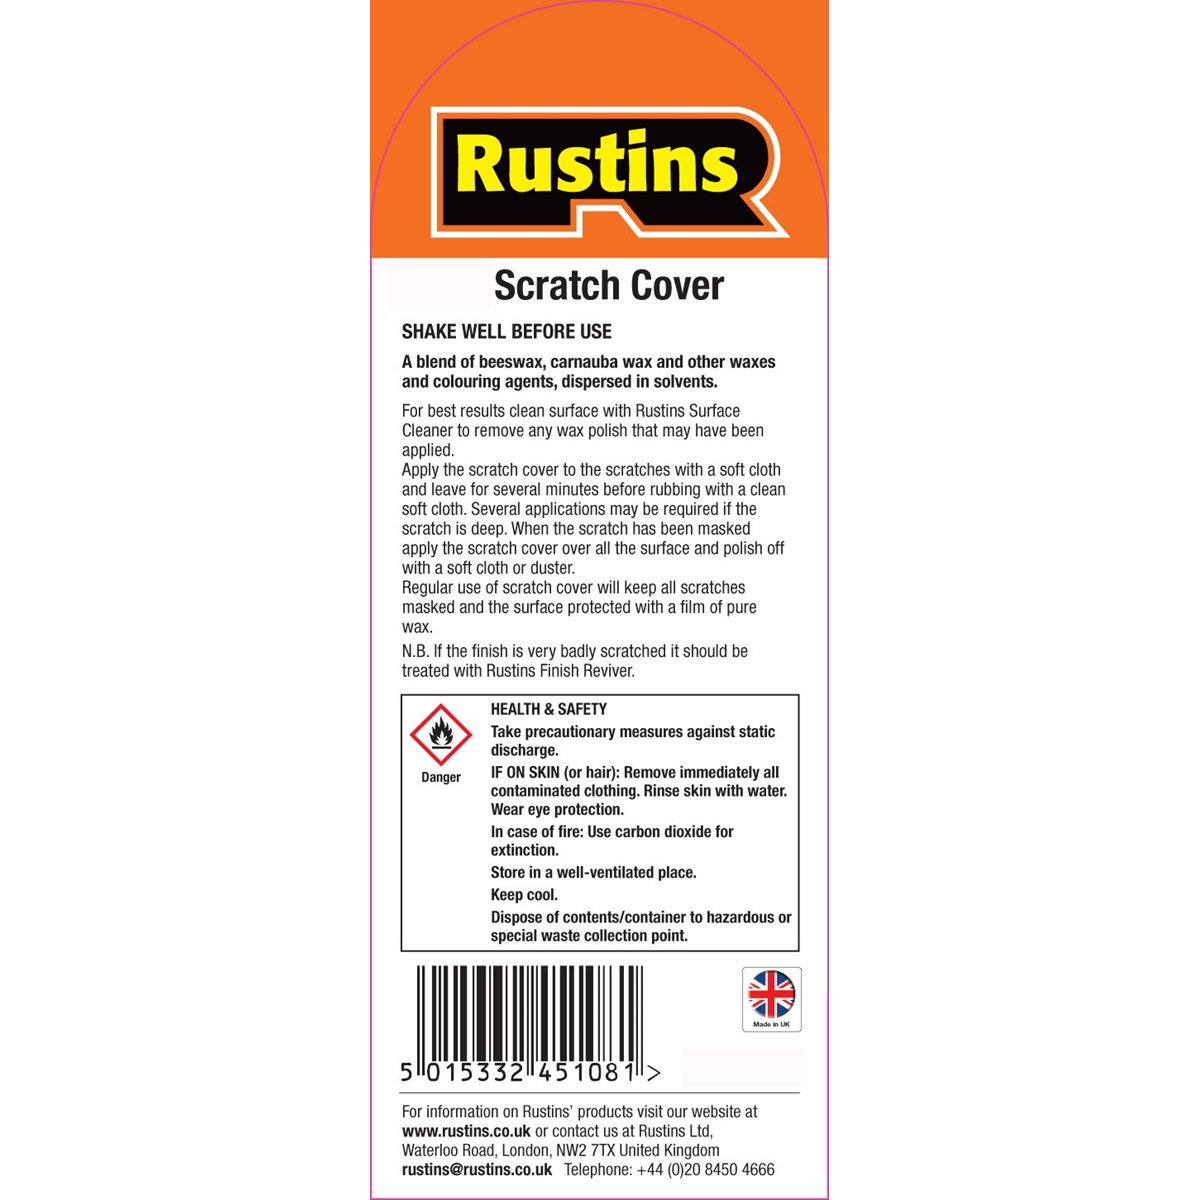 Rustins Scratch Cover usage instructions